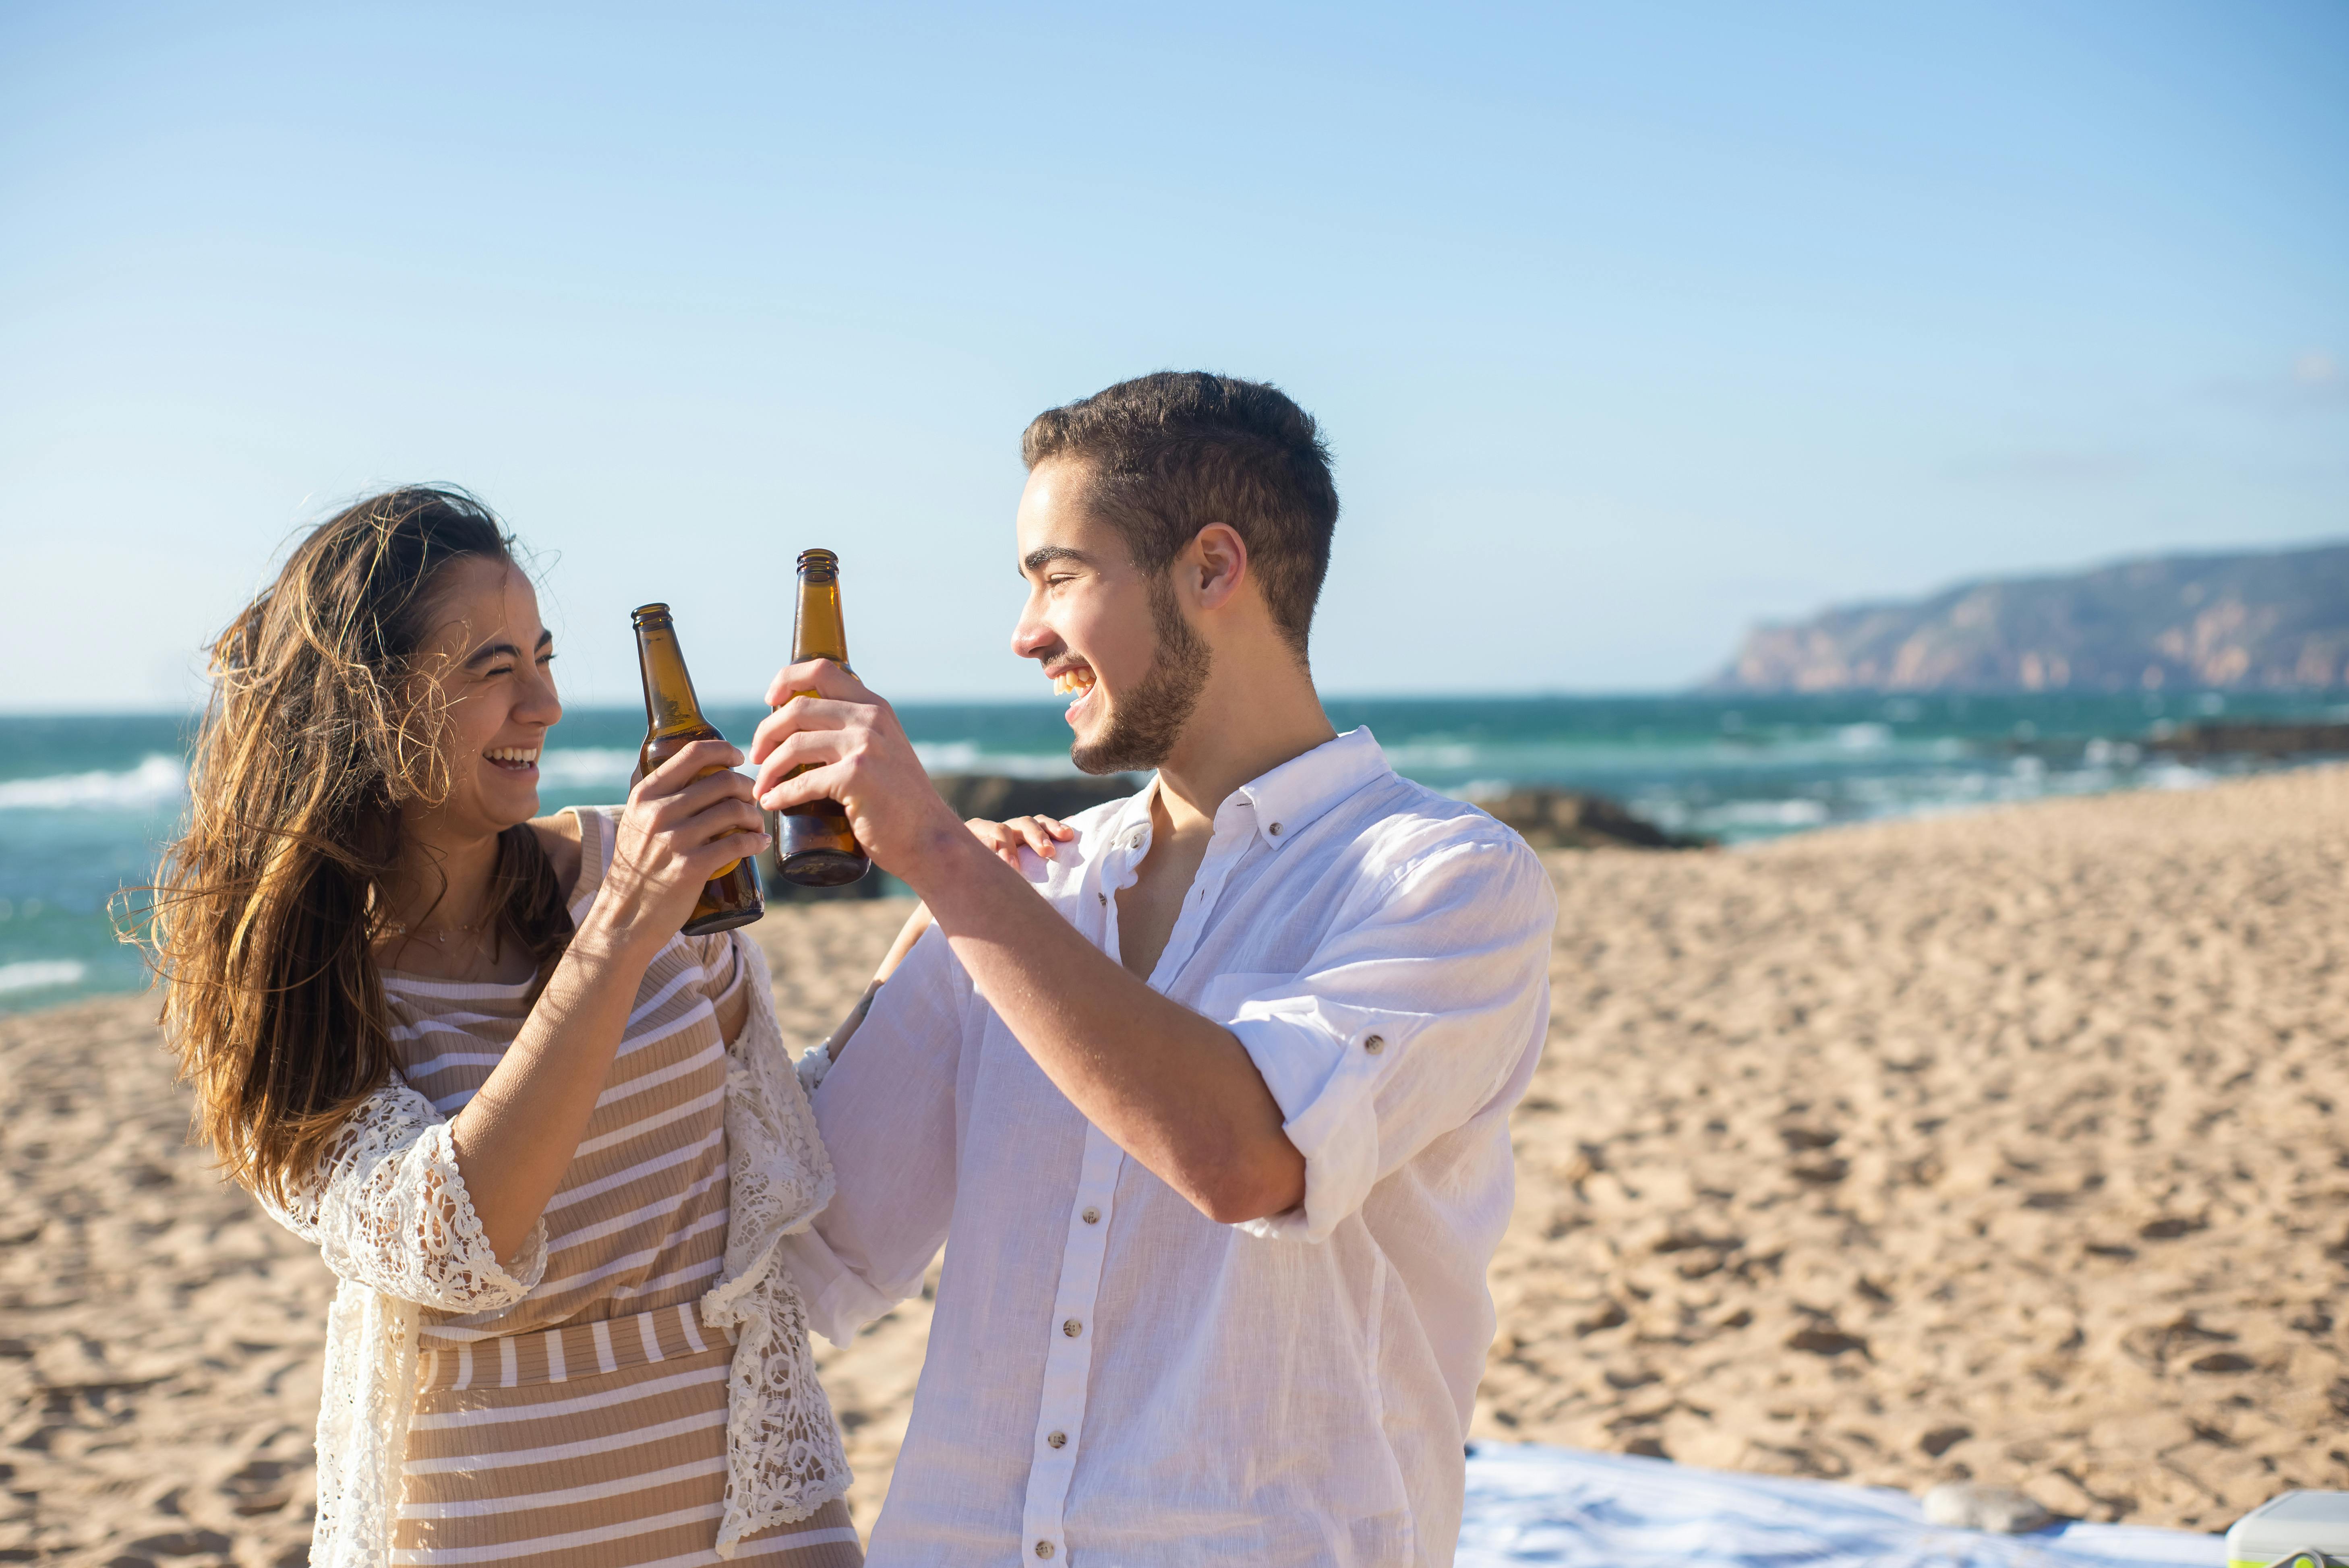 a man and woman holding beer bottles while looking at each other